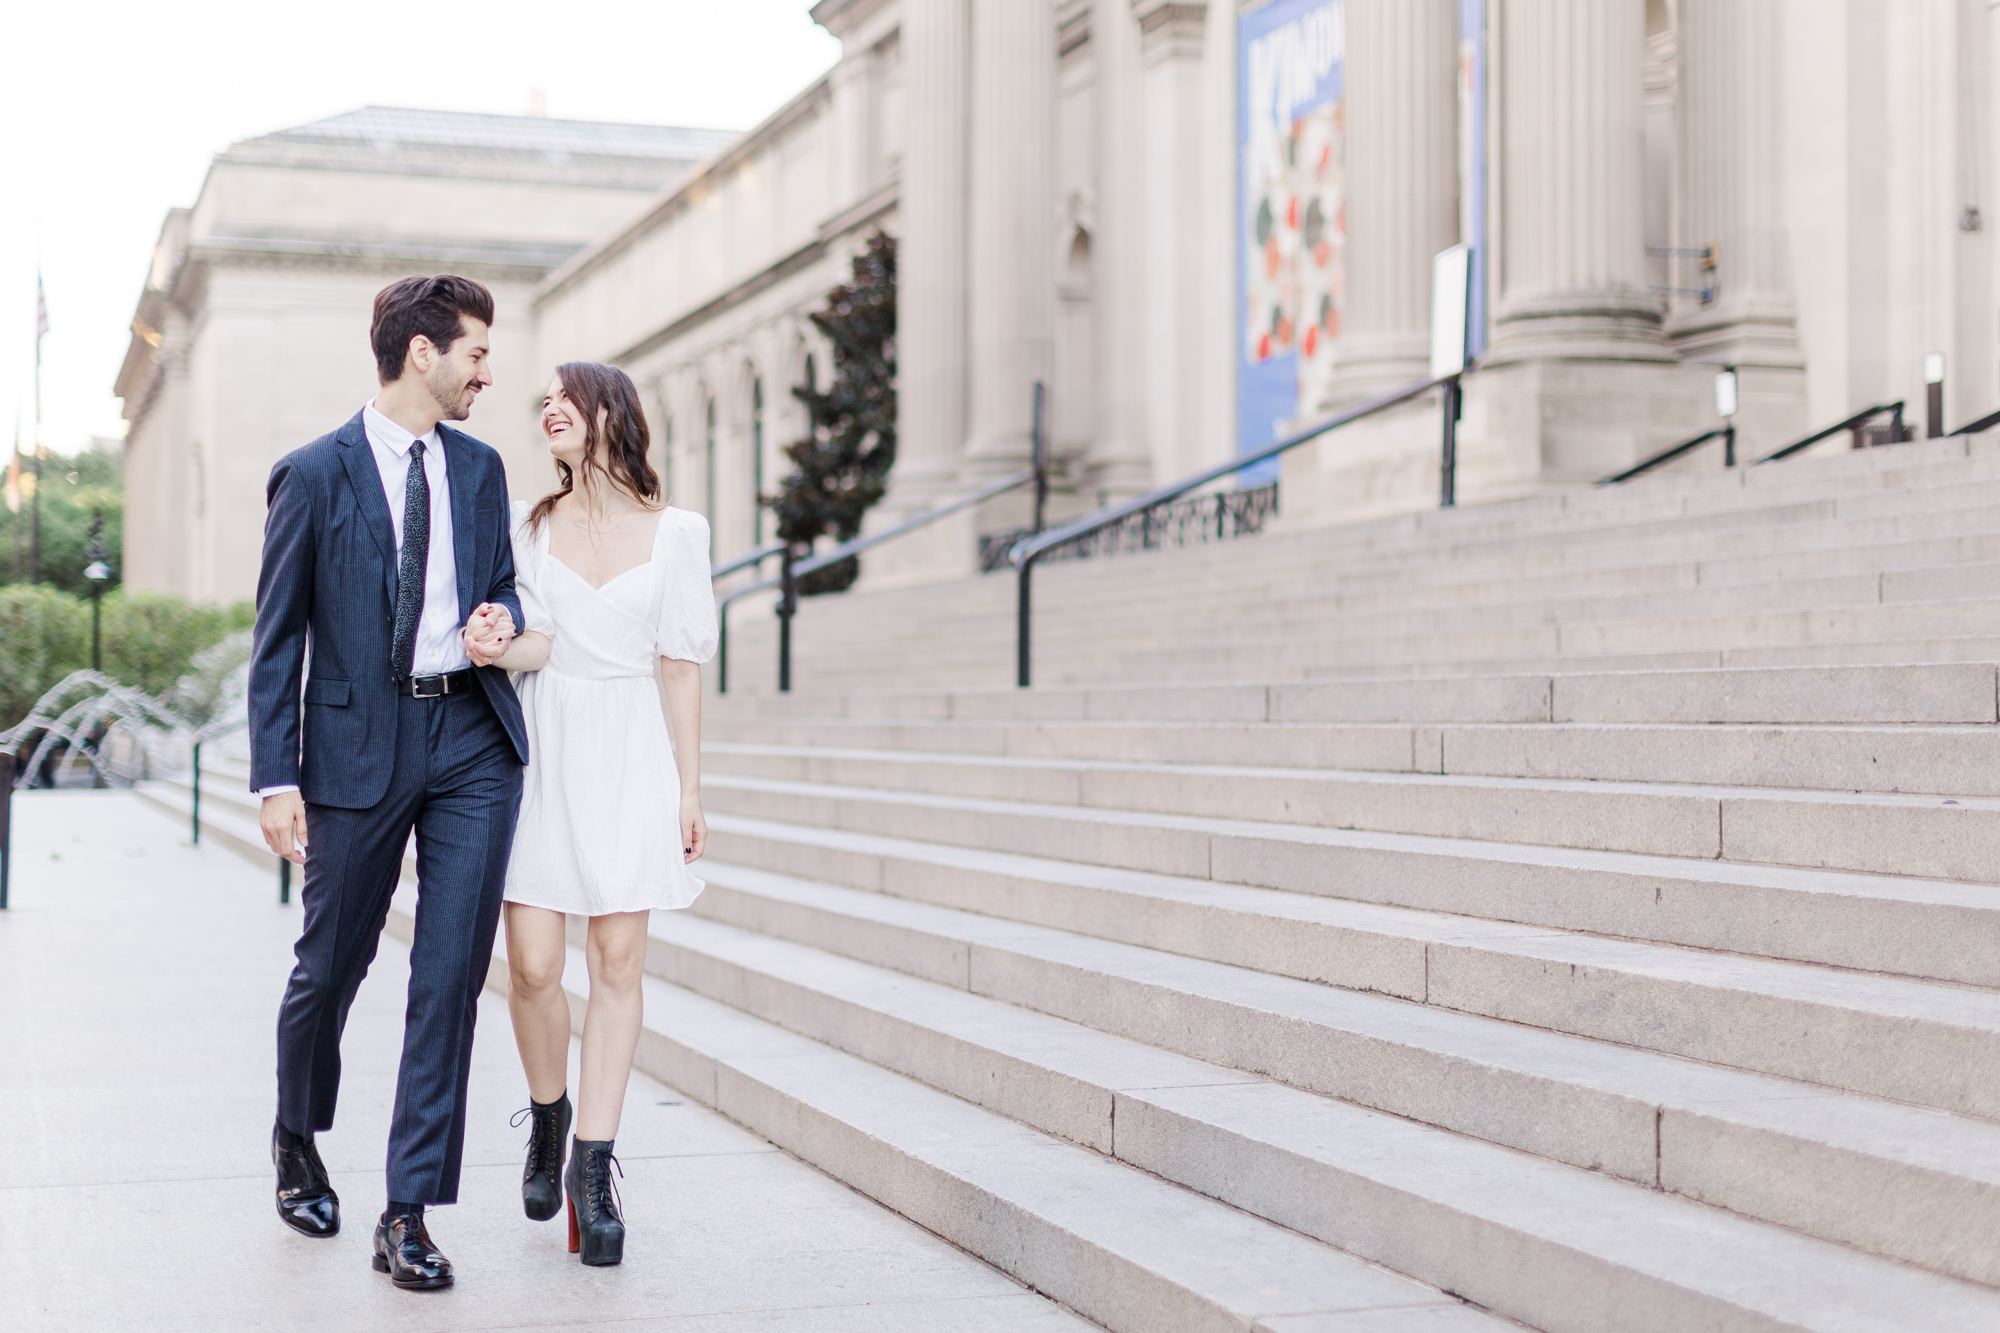 Perfect Central Park Engagement Photos in NYC